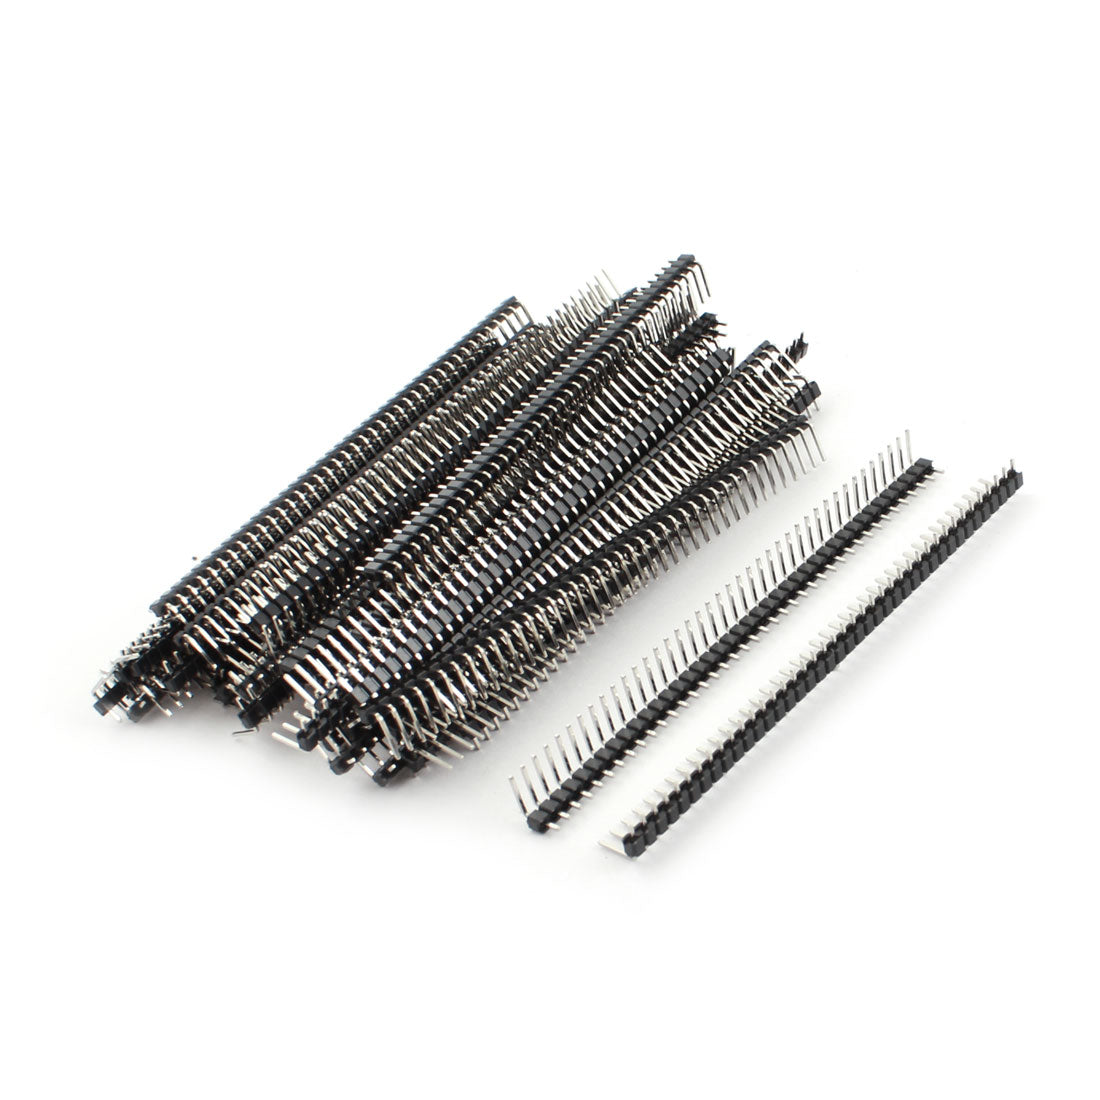 uxcell Uxcell 50 Pcs 2.54mm Pitch 90 Degree 40-Pin Male Single Row Pin Header Strip Connector 100mm Length